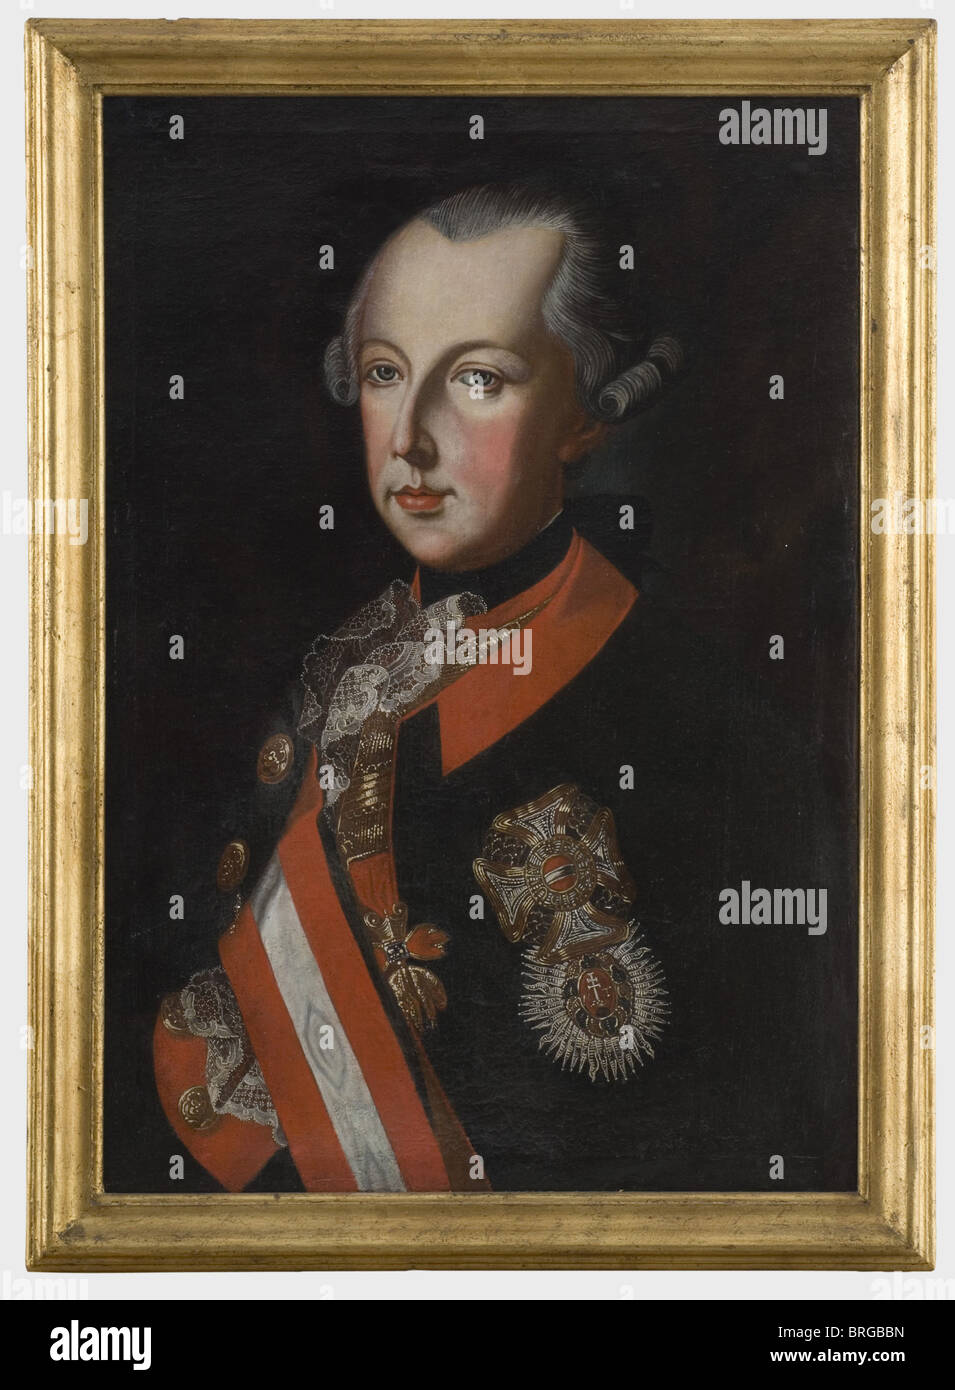 Kaiser Joseph II of Austria (1741 - 1790), a bust portrait of the Kaiser in uniform, circa 1765 Contemporary office portrait of the Kaiser in uniform with the Order of the Golden Fleece, the Military Order of Maria Theresia and the Order of Saint Stephen. Oil on canvas, 64 x 44 cm, unsigned. Small, restorable tear and old mended tear. Newer frame., people, 18th century, object, objects, stills, clipping, clippings, cut out, cut-out, cut-outs, painting, paintings, picture, pictures, illustrations, fine arts, art, man, men, male, Stock Photo